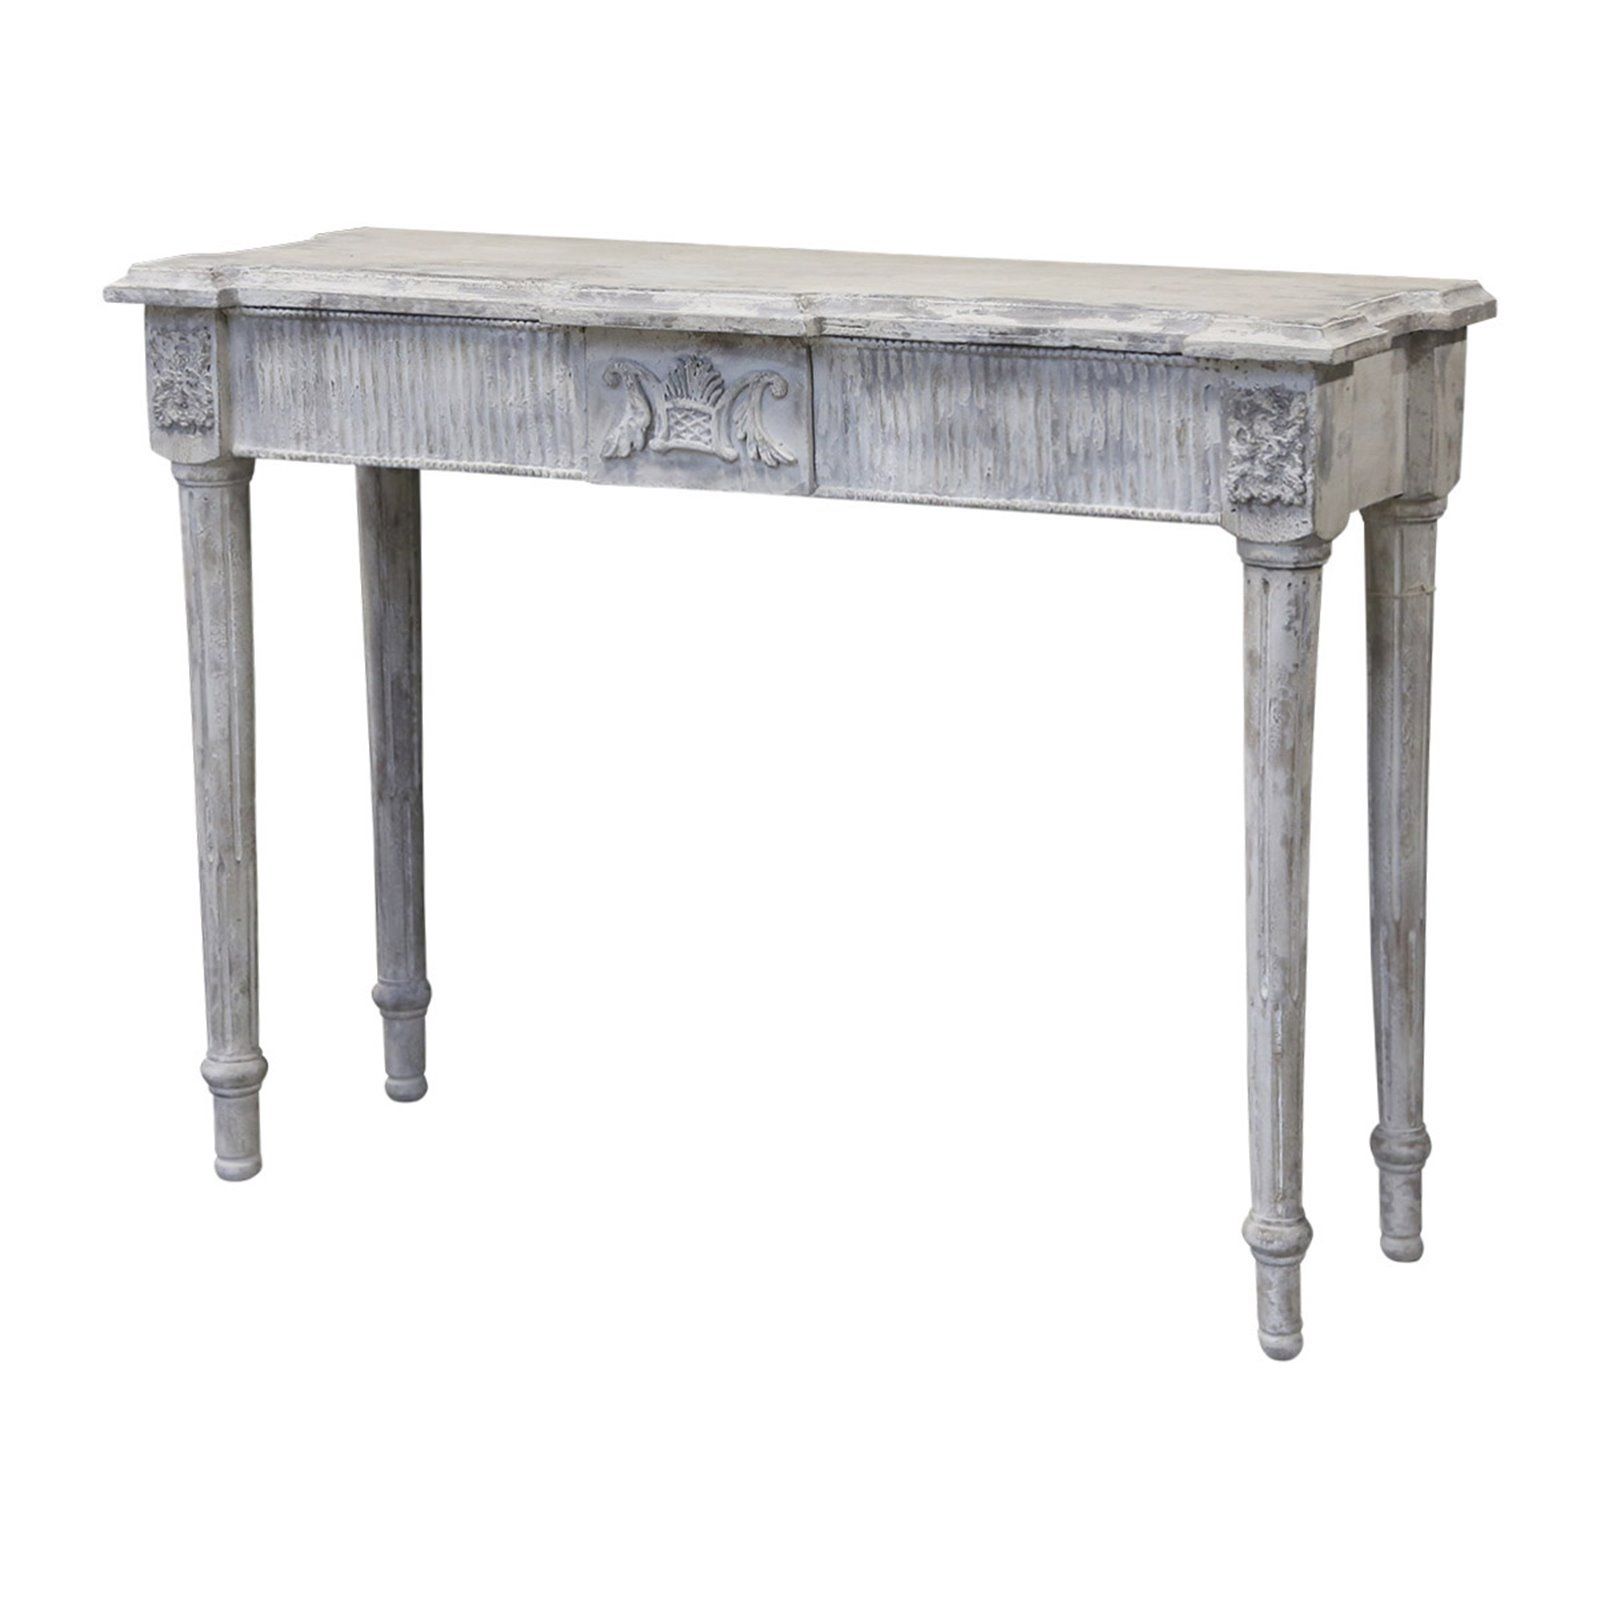 Vintage White Washed Console Table Throughout White Geometric Console Tables (View 12 of 20)